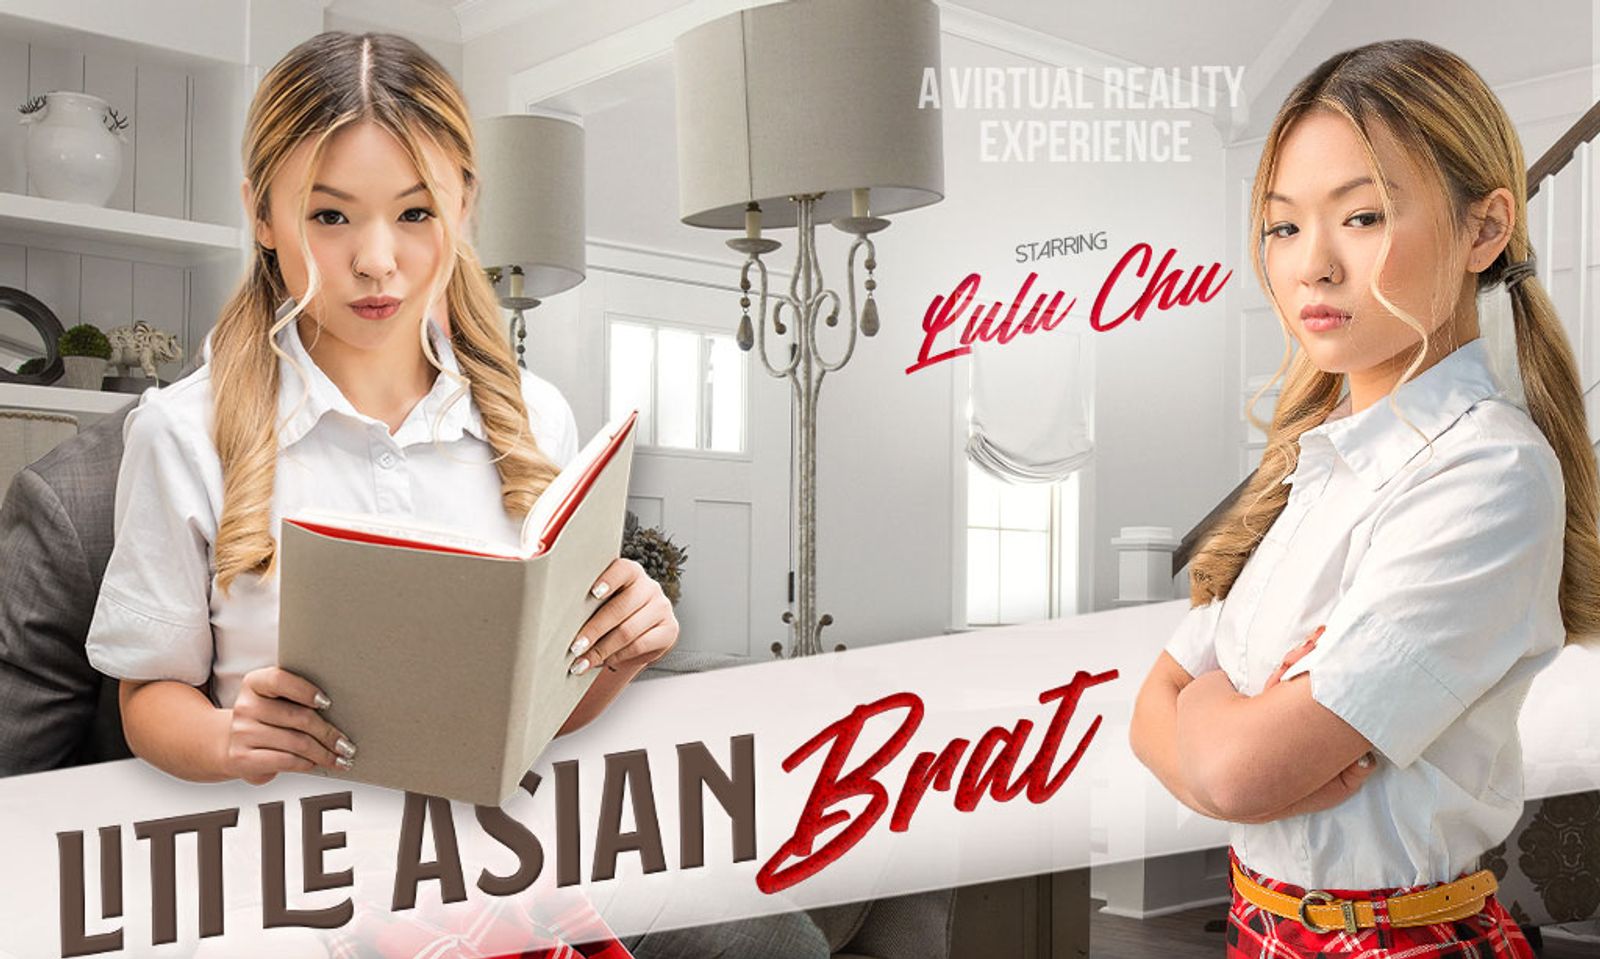 Bratty Lulu Chu Needs To Be Taught A Lesson—In Virtual Reality